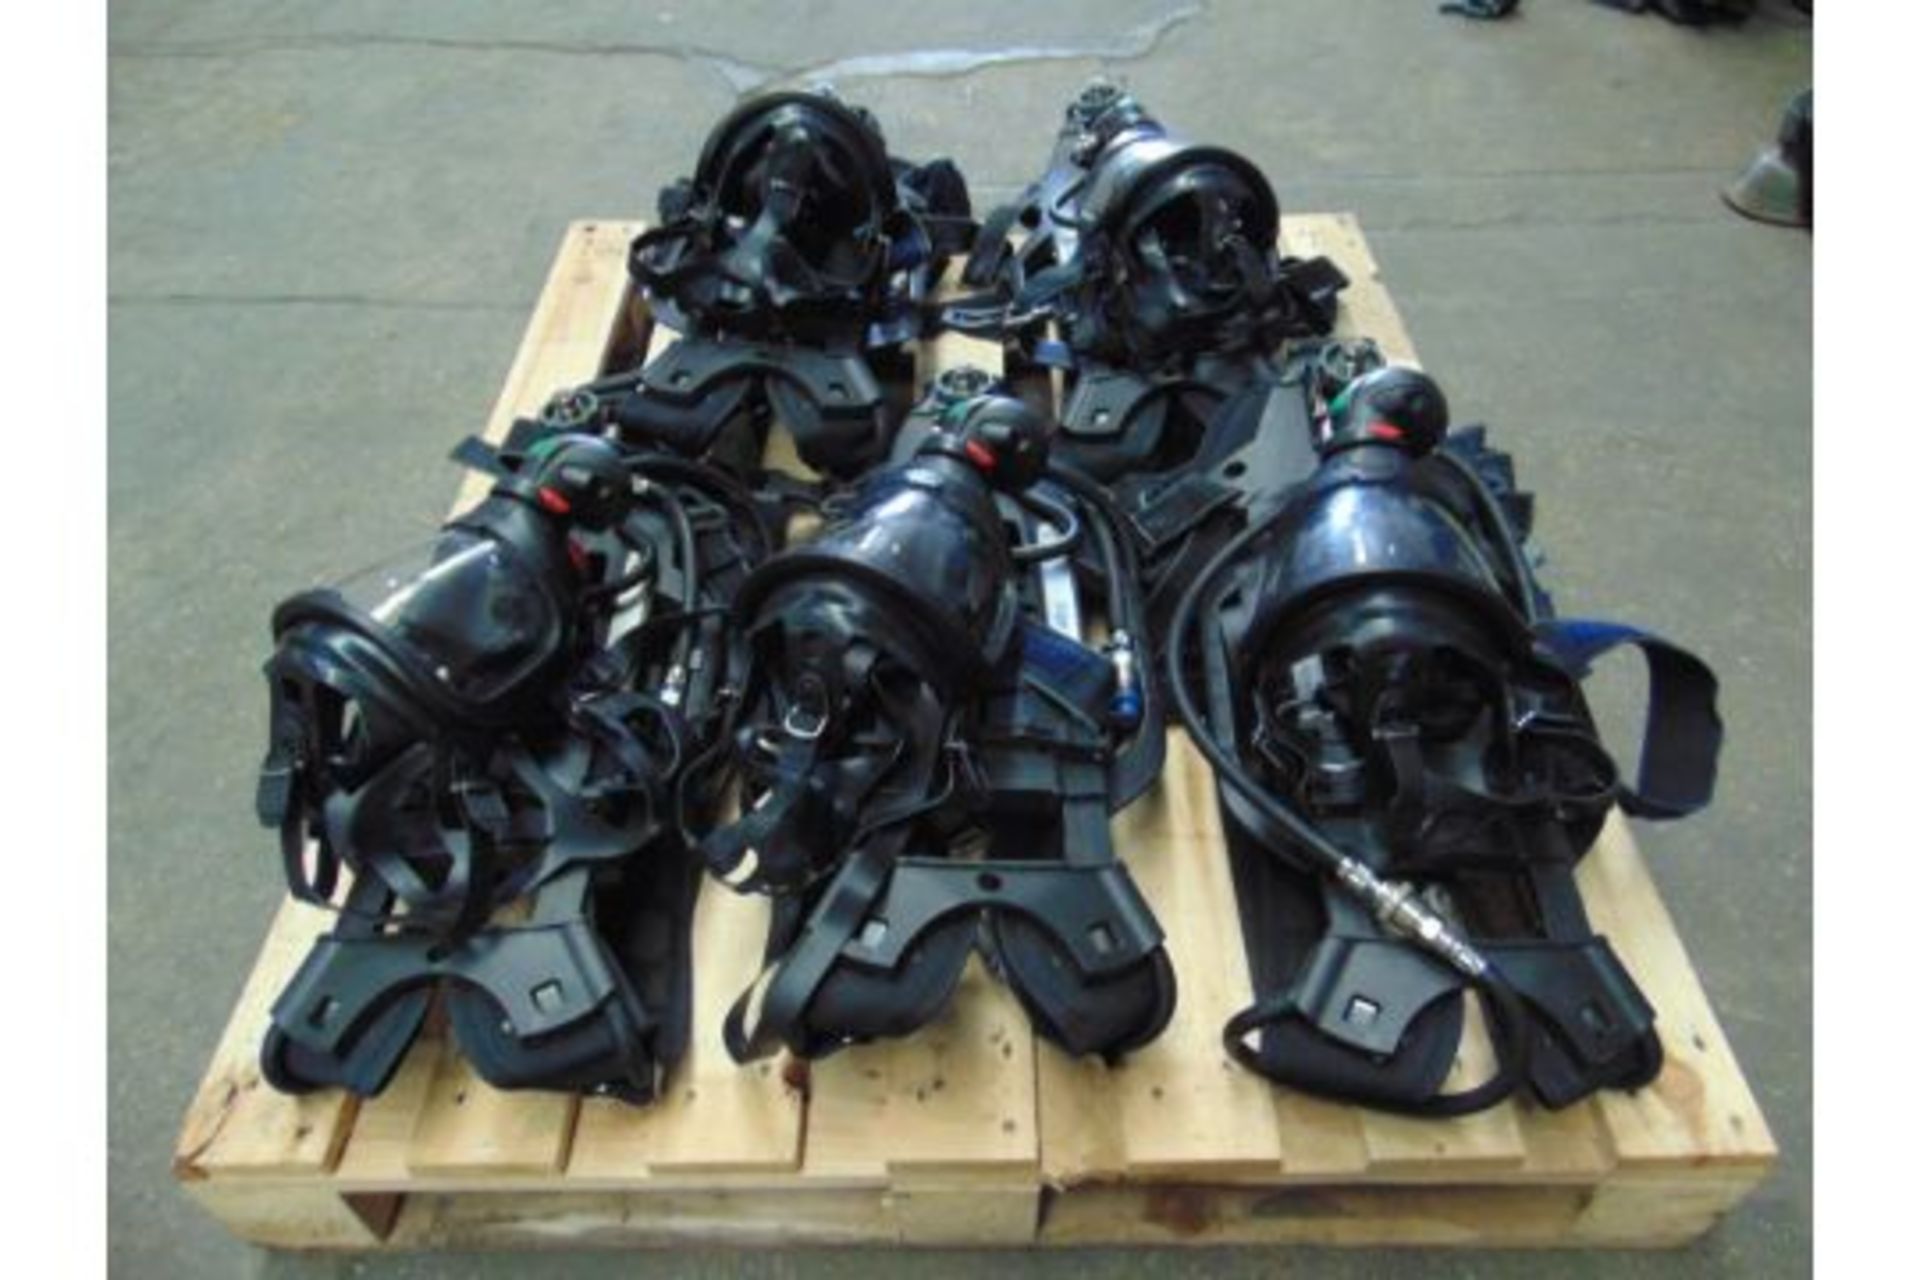 5 x Drager PSS 7000 Self Contained Breathing Apparatus w/ 10 x Drager 300 Bar Air Cylinders - Image 10 of 20